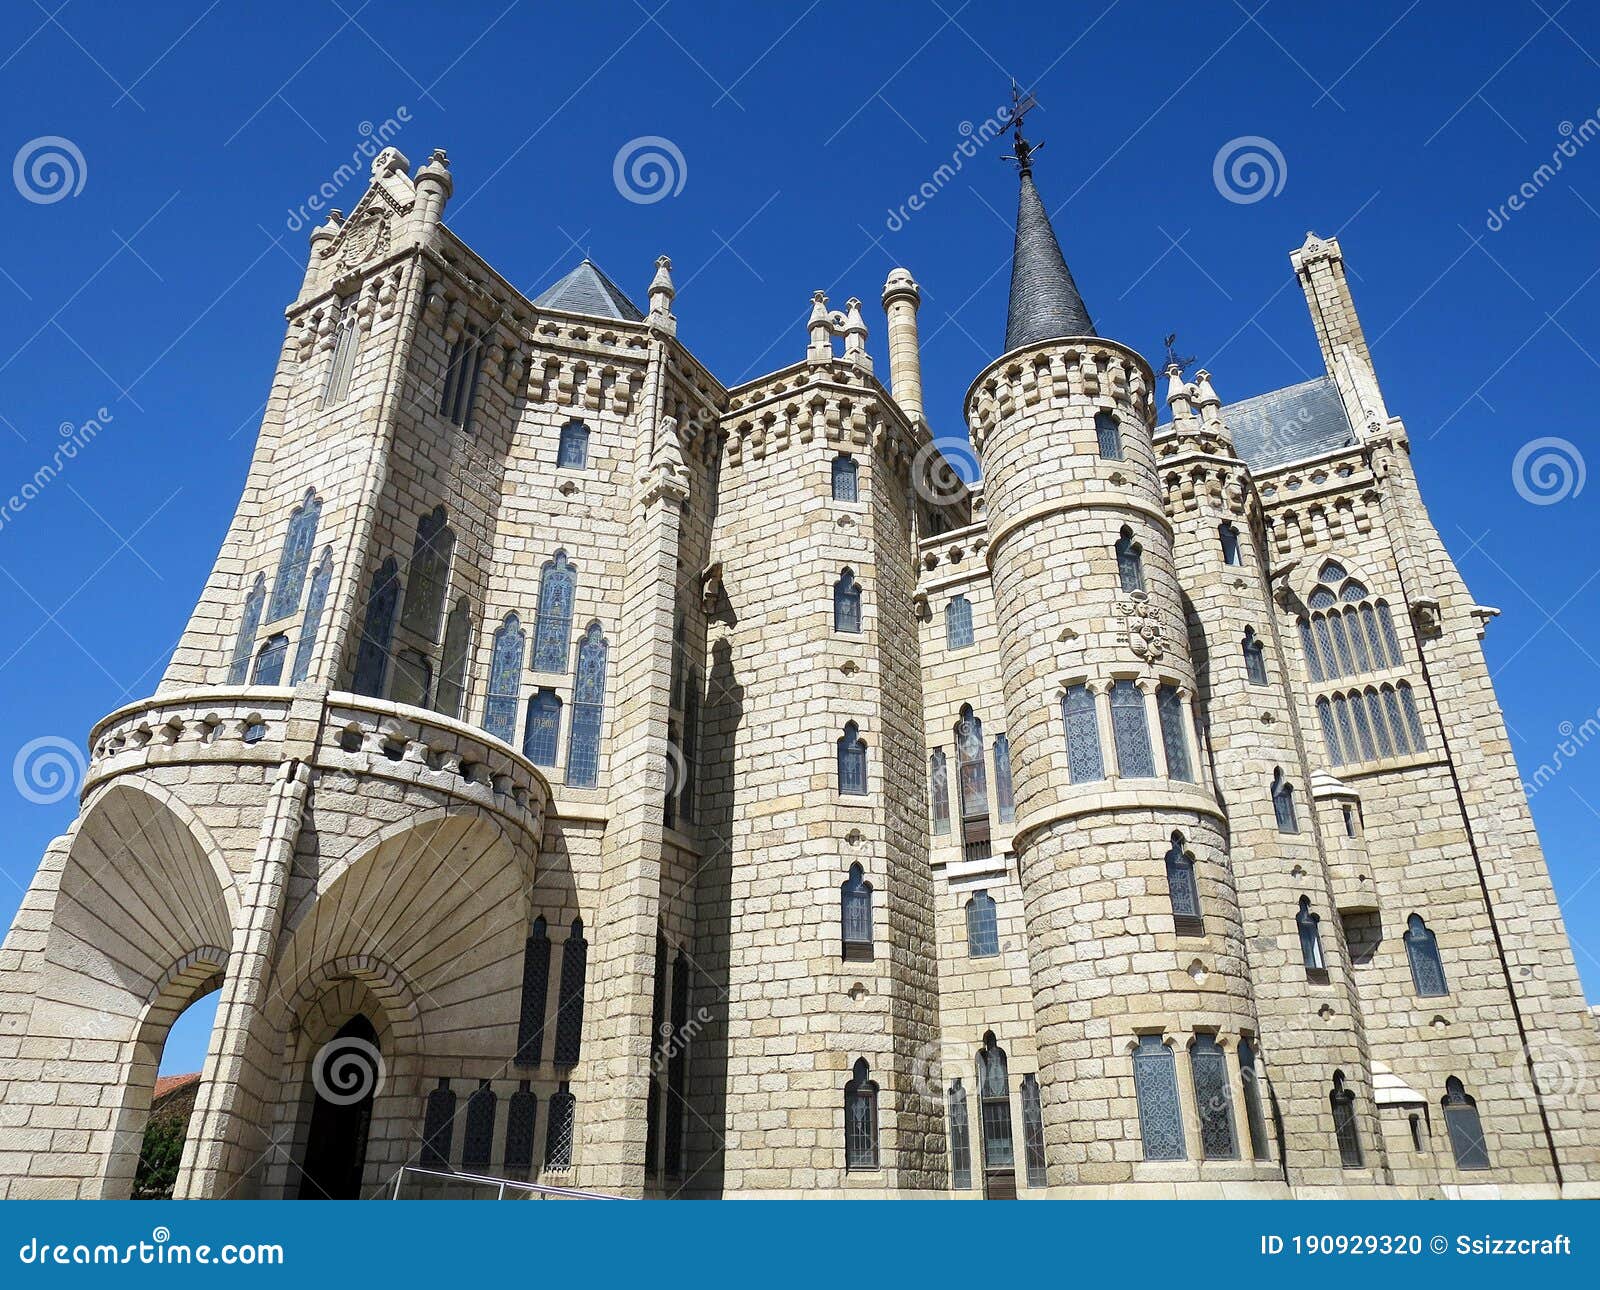 the episcopal palace (palacio episcopal d'estorga) in astorga, spain, currently the museum of the caminos